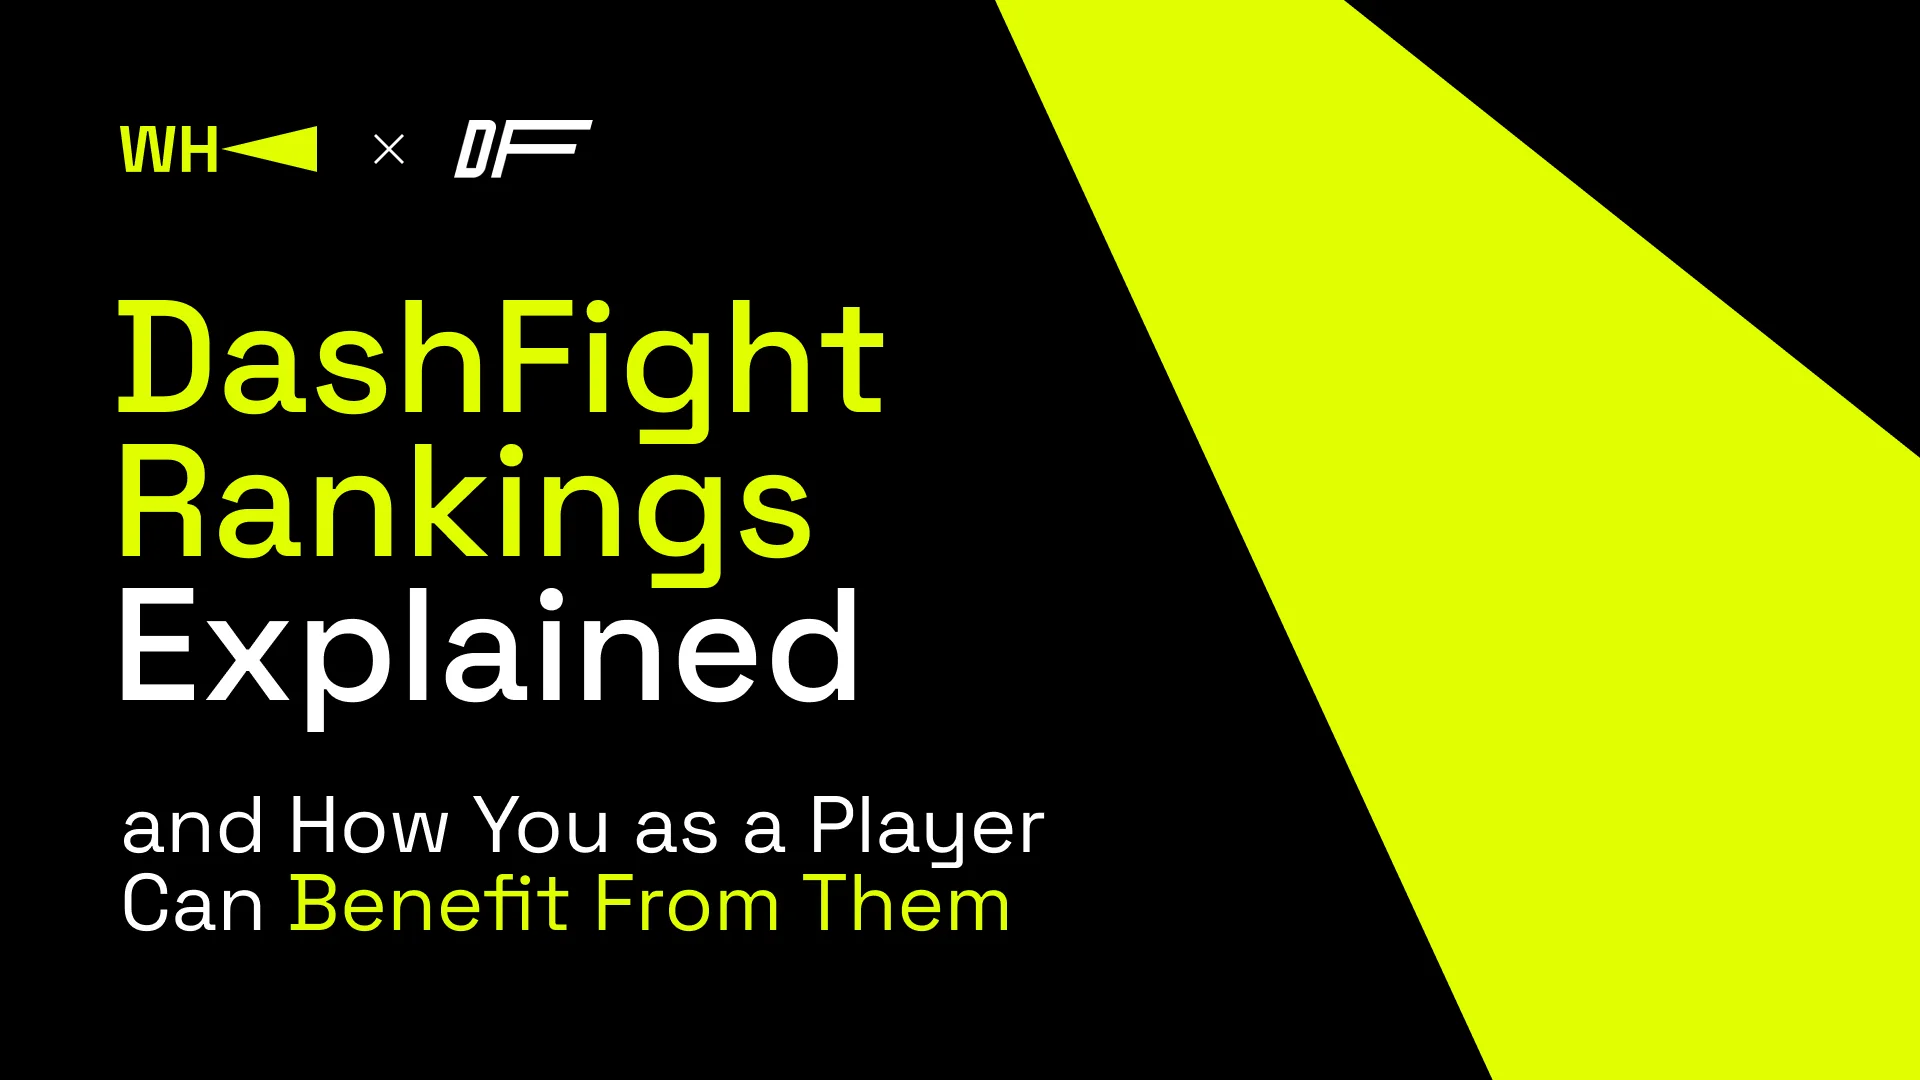 Dashfight Rankings Explained (And How You as a Player Can Benefit From Them)